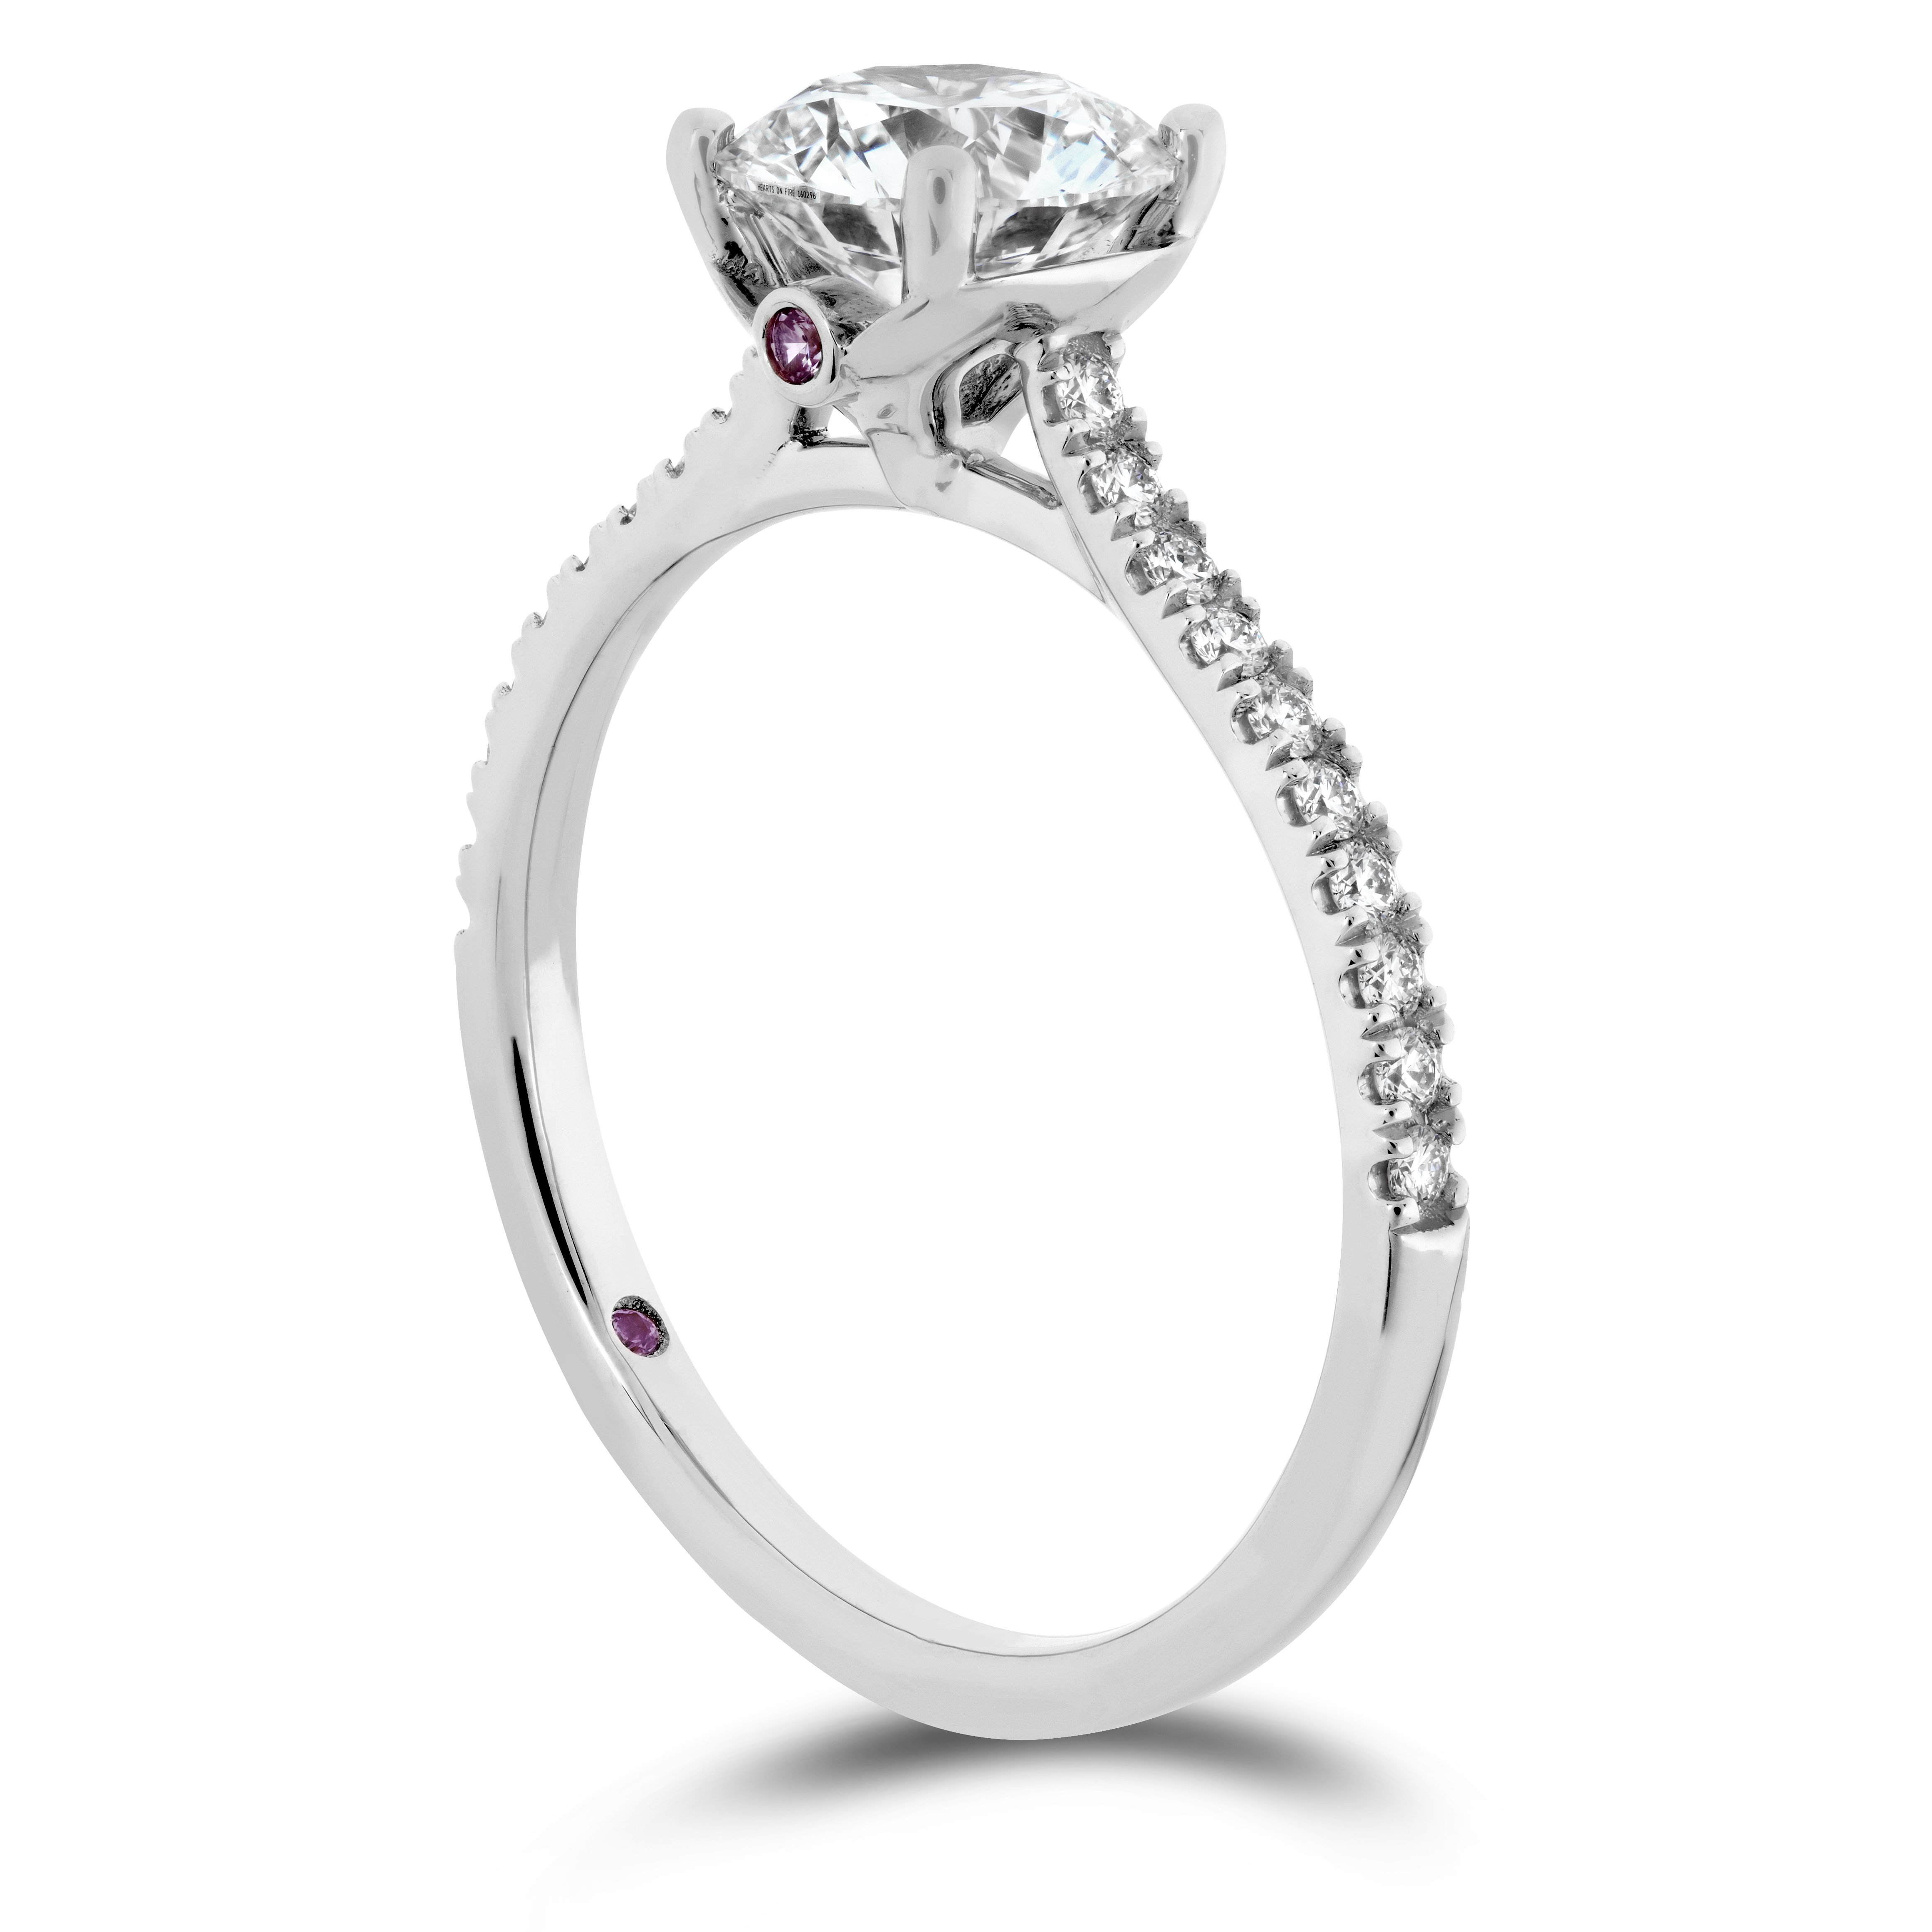 https://www.arthursjewelers.com/content/images/thumbs/Original/Sloane Silhouette Engagement Ring Diamond Band with Sapphires_2-176288851.jpg